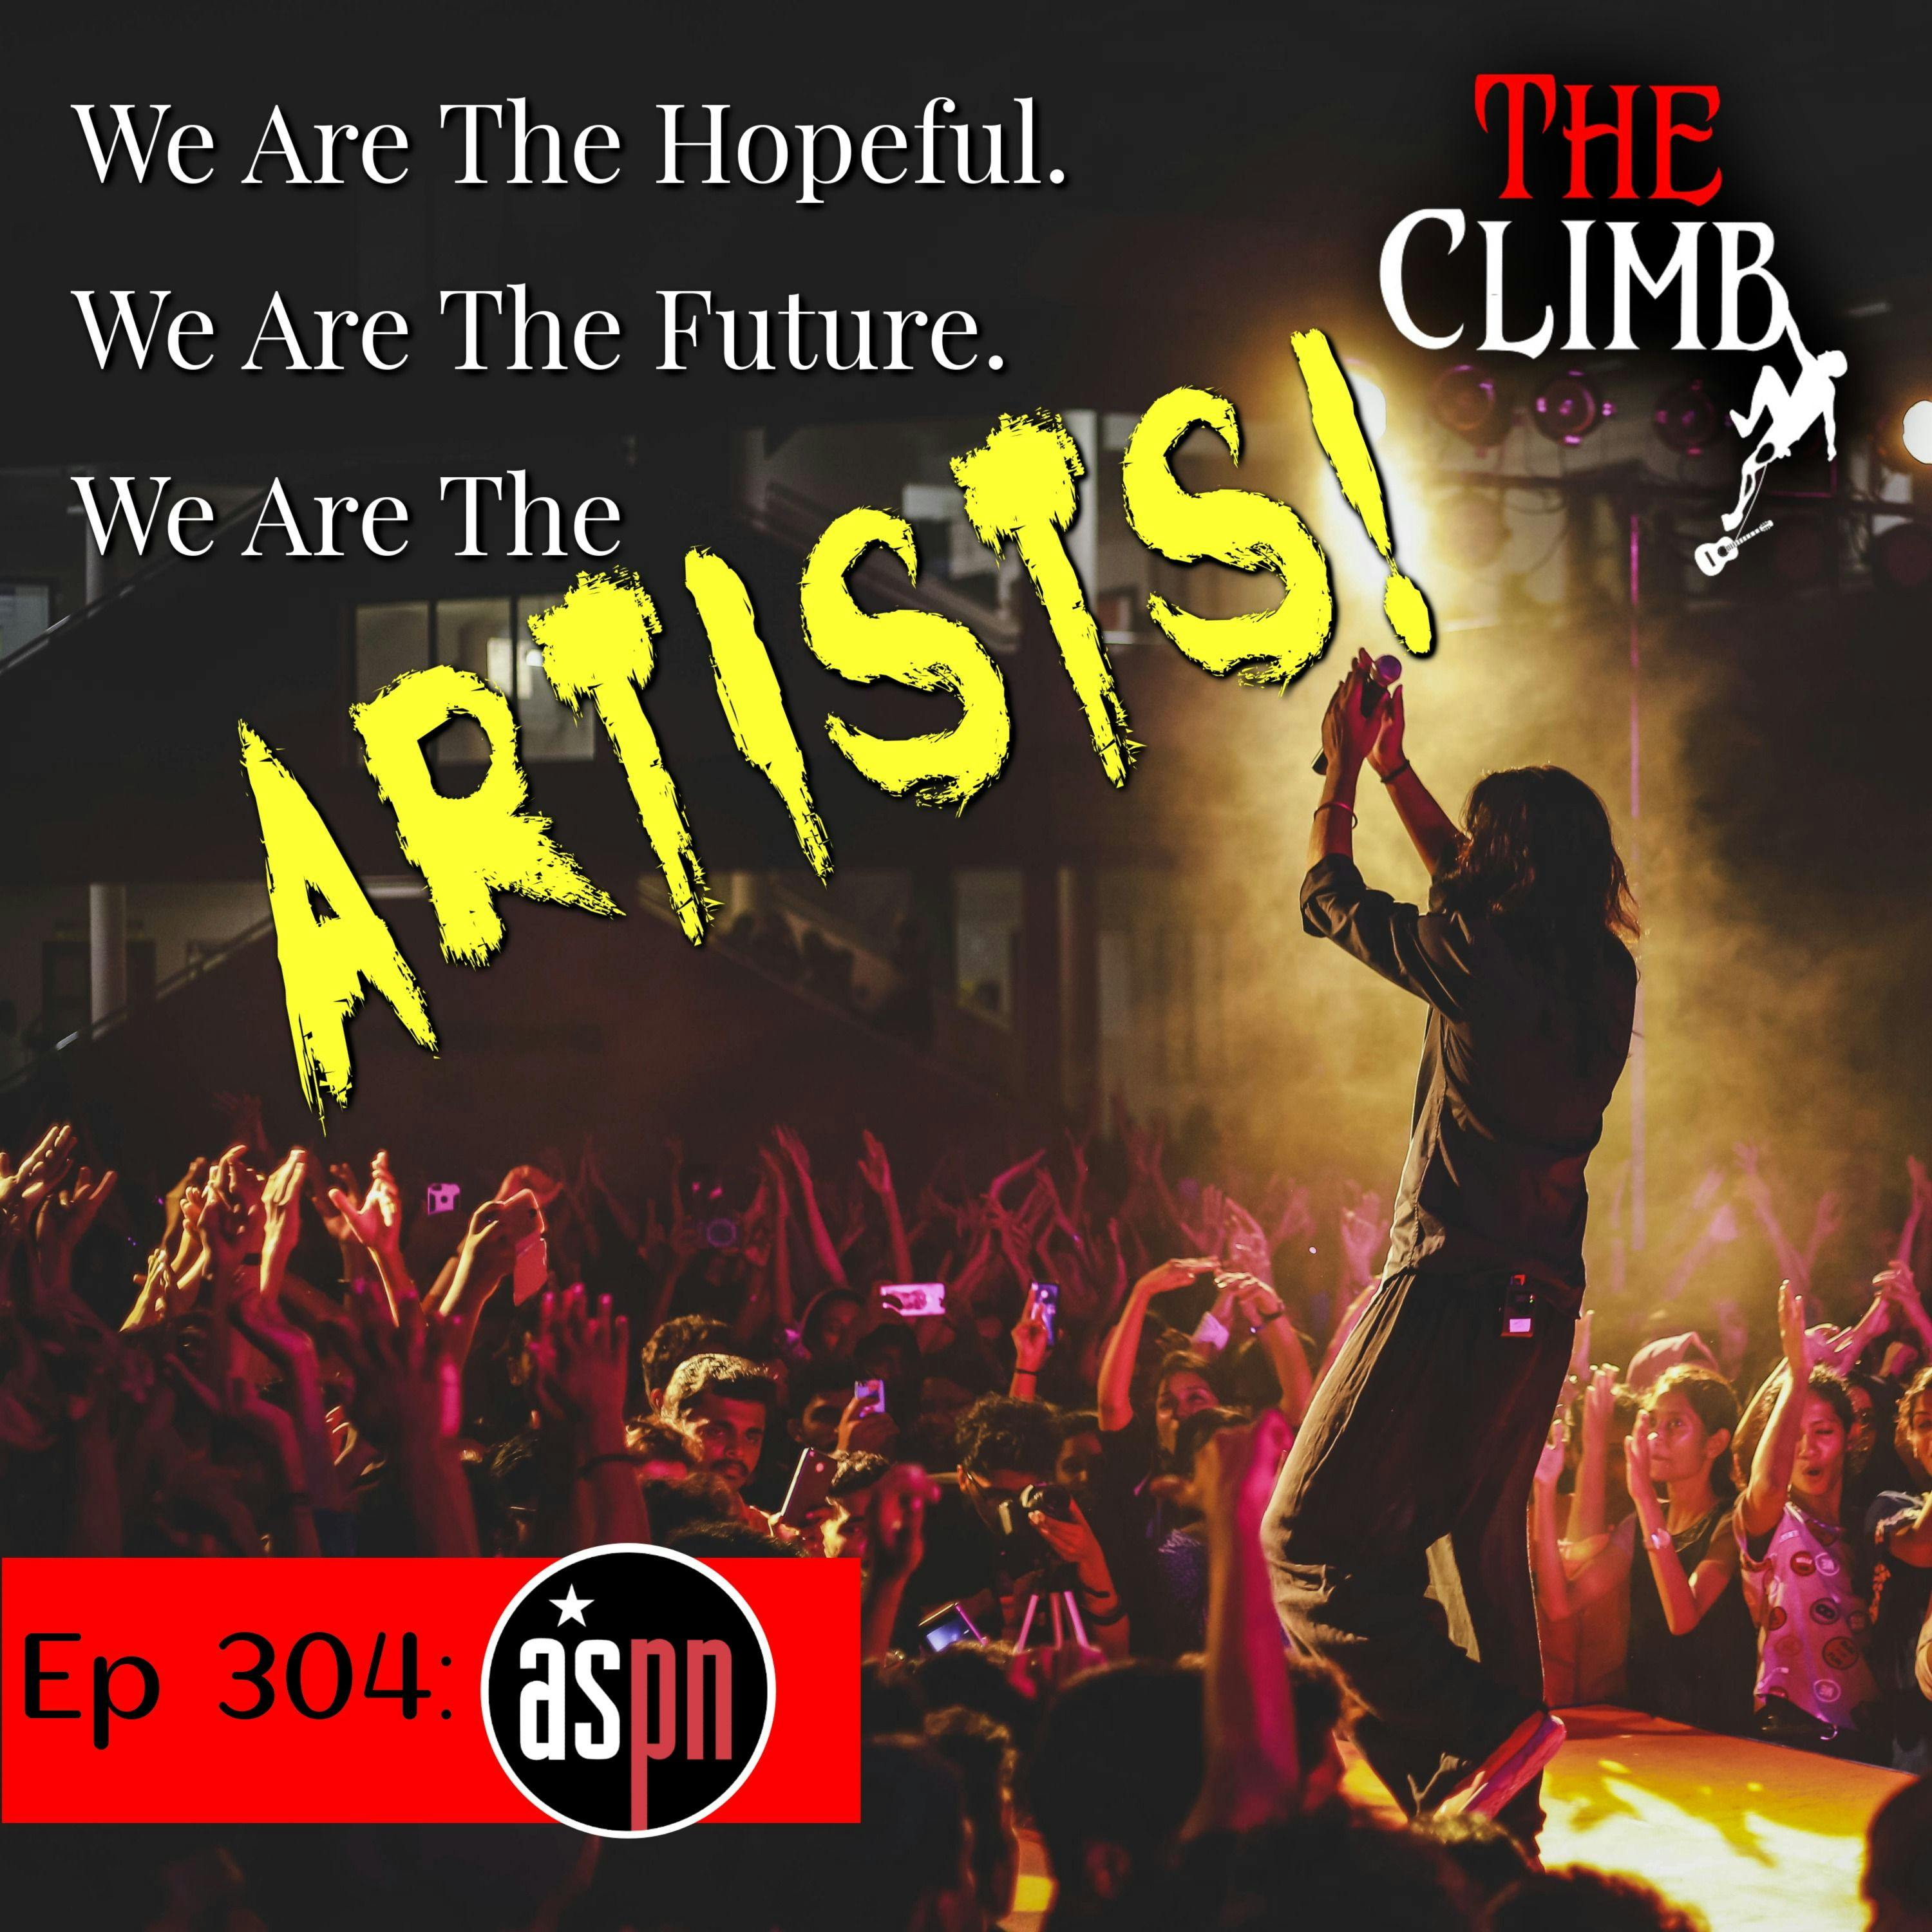 Ep 304: We Are The Hopeful. We Are The Future. We Are The Artists!